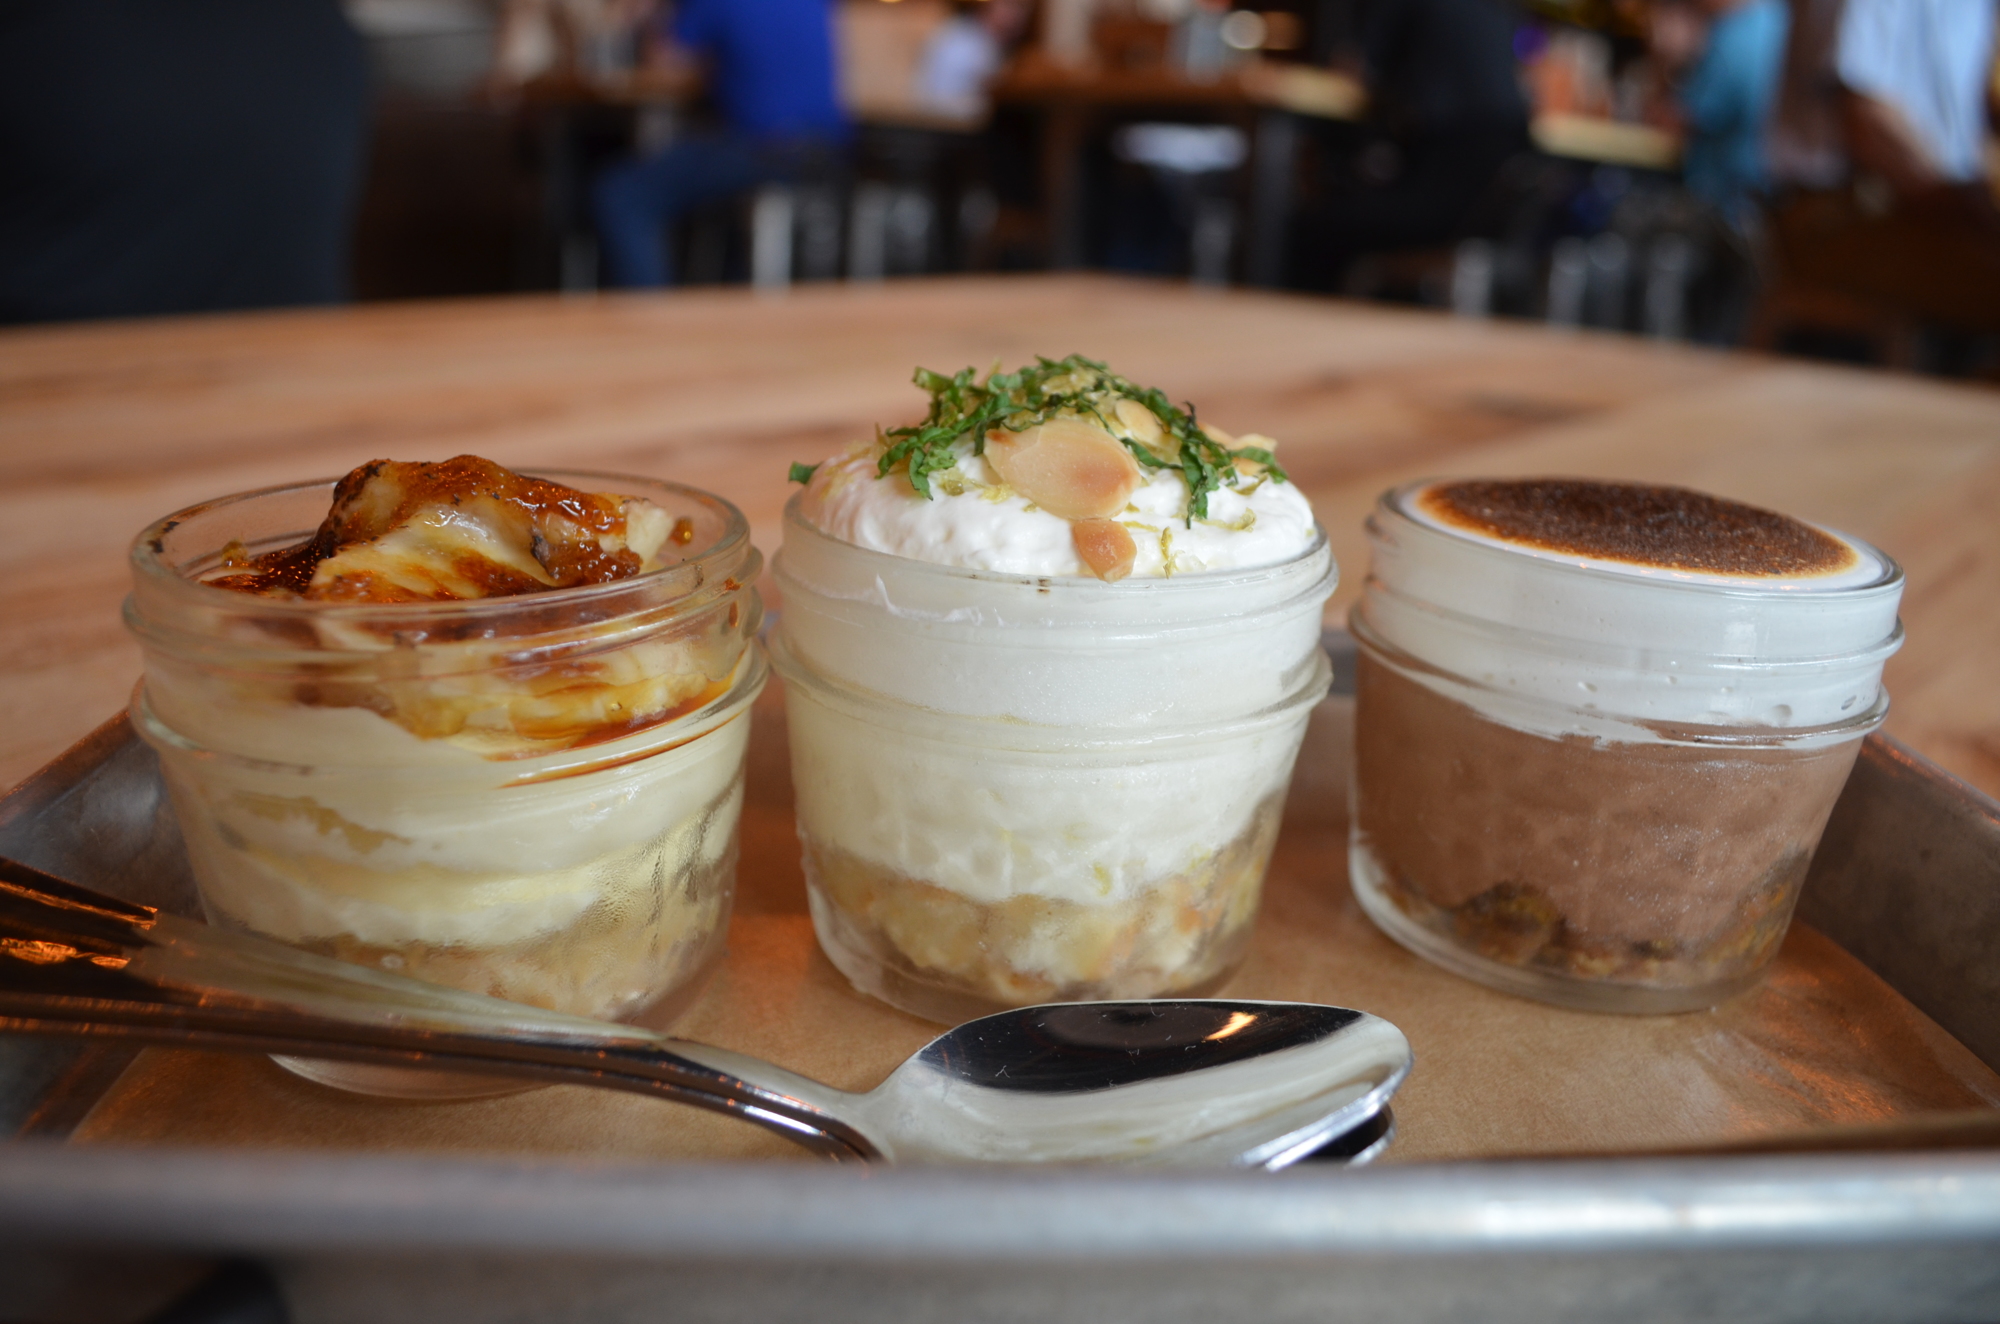 Bananas foster, Key lime pie and s'mores dessert cups